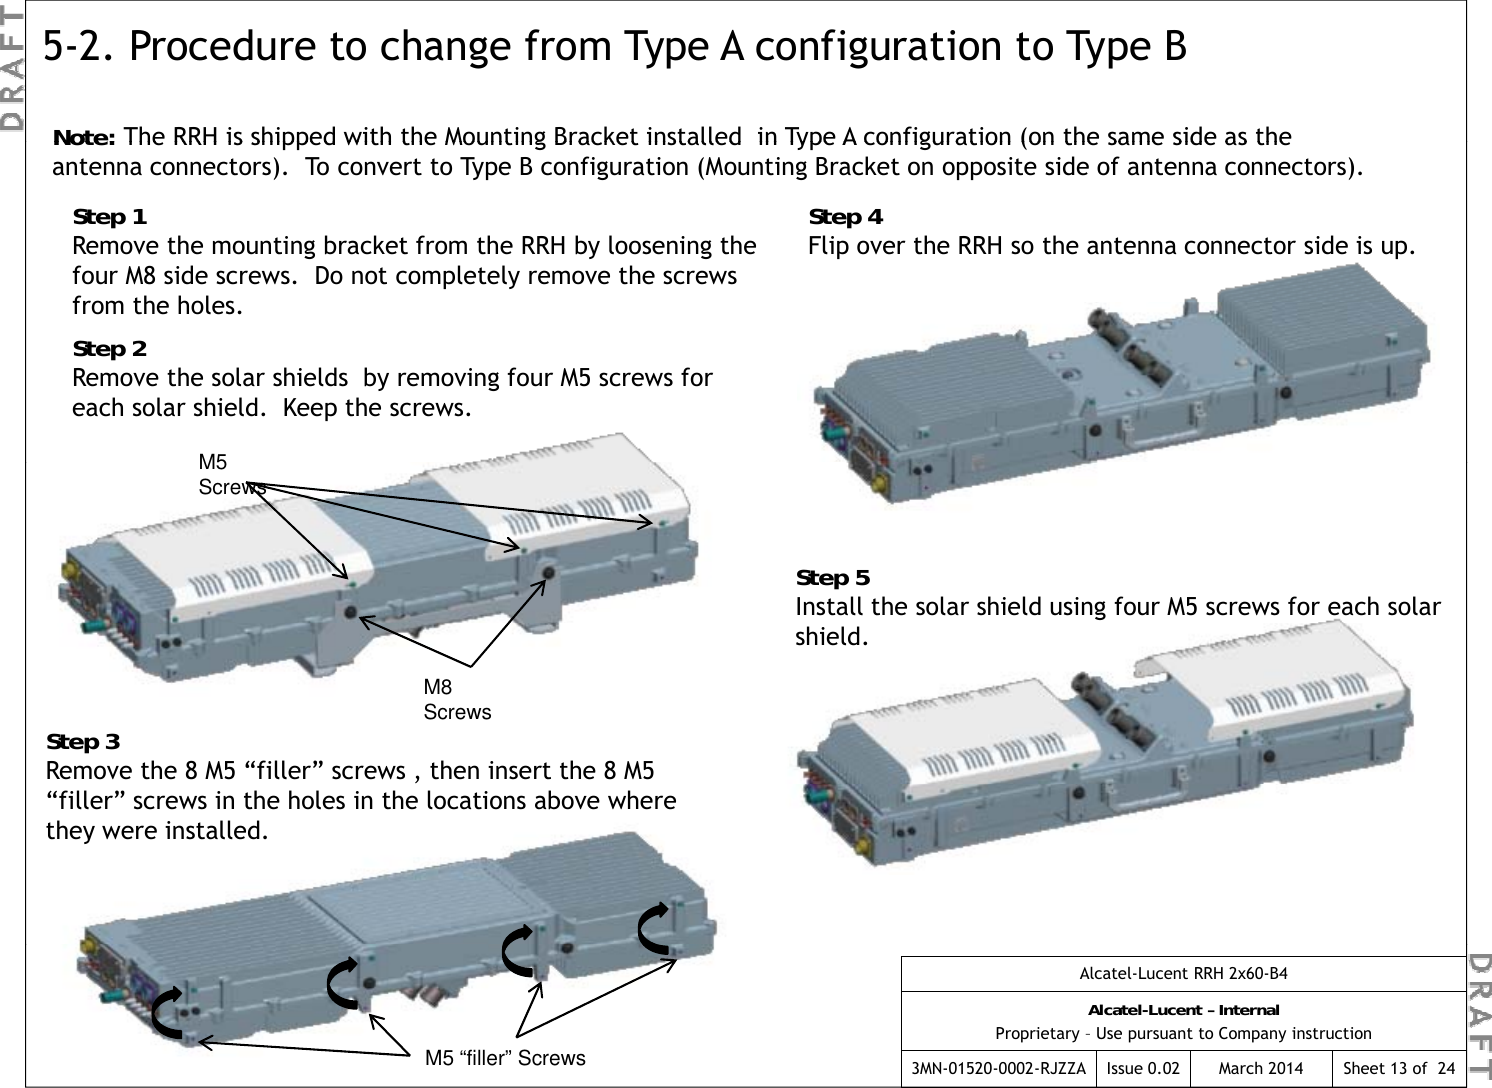 5-2. Procedure to change from Type A configuration to Type B Note: The RRH is shipped with the Mounting Bracket installed  in Type A configuration (on the same side as the Note: The RRH is shipped with the Mounting Bracket installed  in Type A configuration (on the same side as the antenna connectors).  To convert to Type B configuration (Mounting Bracket on opposite side of antenna connectors).Step 4Flip over the RRH so the antenna connector side is up.Step 1Remove the mounting bracket from the RRH by loosening the four M8 side screws.  Do not completely remove the screws from the holesM5from the holes.Step 2Remove the solar shields  by removing four M5 screws for each solar shield.  Keep the screws.M5 ScrewsStep 5Install the solar shield using four M5 screws for each solar M8 ScrewsStep 3Remove the 8 M5 “filler” screws , then insert the 8 M5 shield.“filler” screws in the holes in the locations above where they were installed.Alcatel-Lucent RRH 2x60-B4Alcatel-Lucent – InternalProprietary – Use pursuant to Company instruction3MN-01520-0002-RJZZA Issue 0.02 March 2014M5 “filler” Screws Sheet 13 of  24